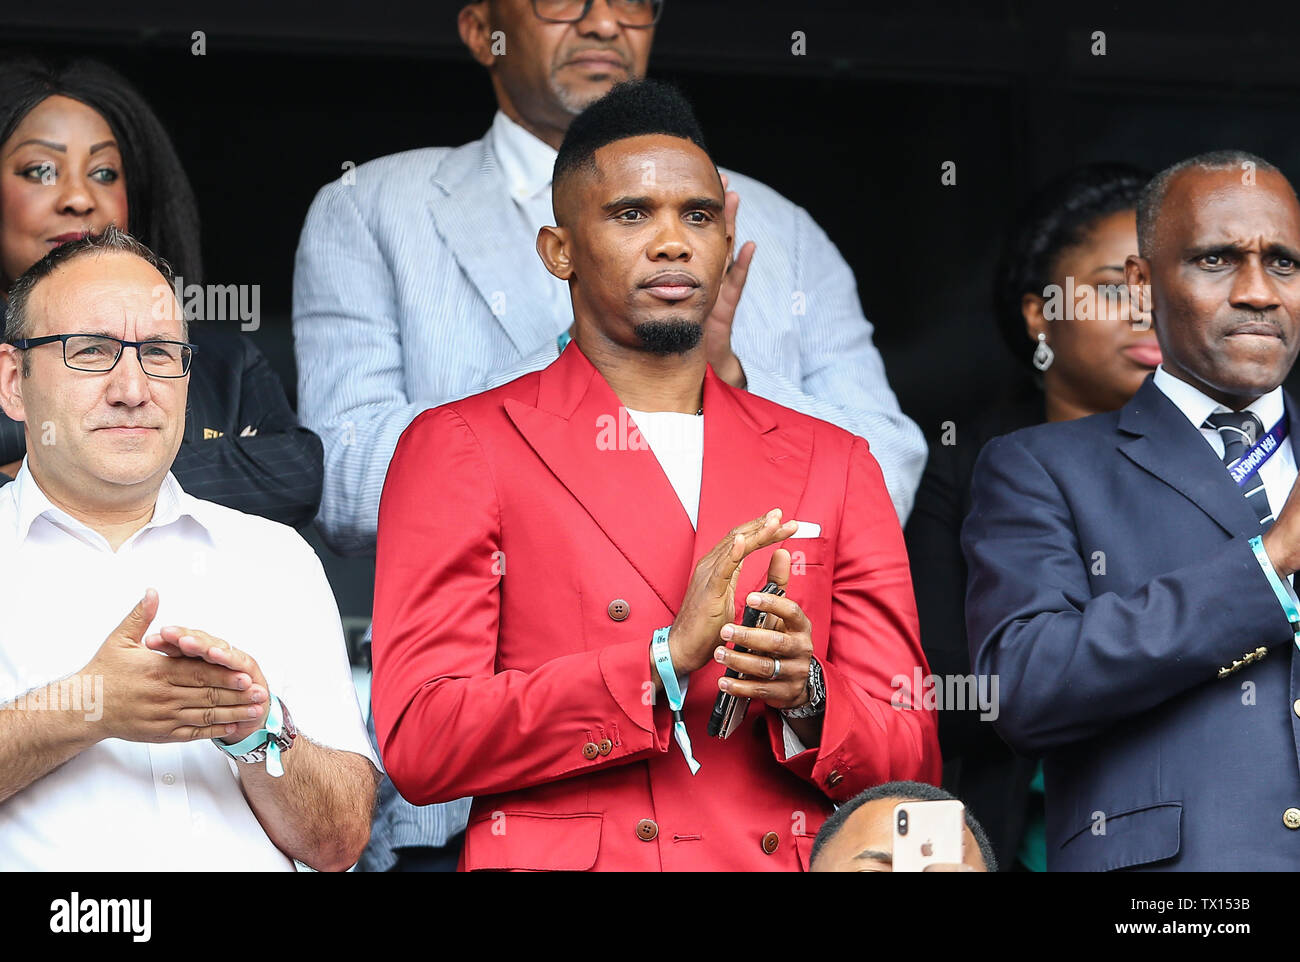 Valenciennes, France. 23rd June, 2019. Former football player of Cameroon Samuel Eto'o reacts during a round of 16 match between England and Cameroon at the 2019 FIFA Women's World Cup in Valenciennes, France, June 23, 2019. England won 3-0. Credit: Shan Yuqi/Xinhua/Alamy Live News Stock Photo